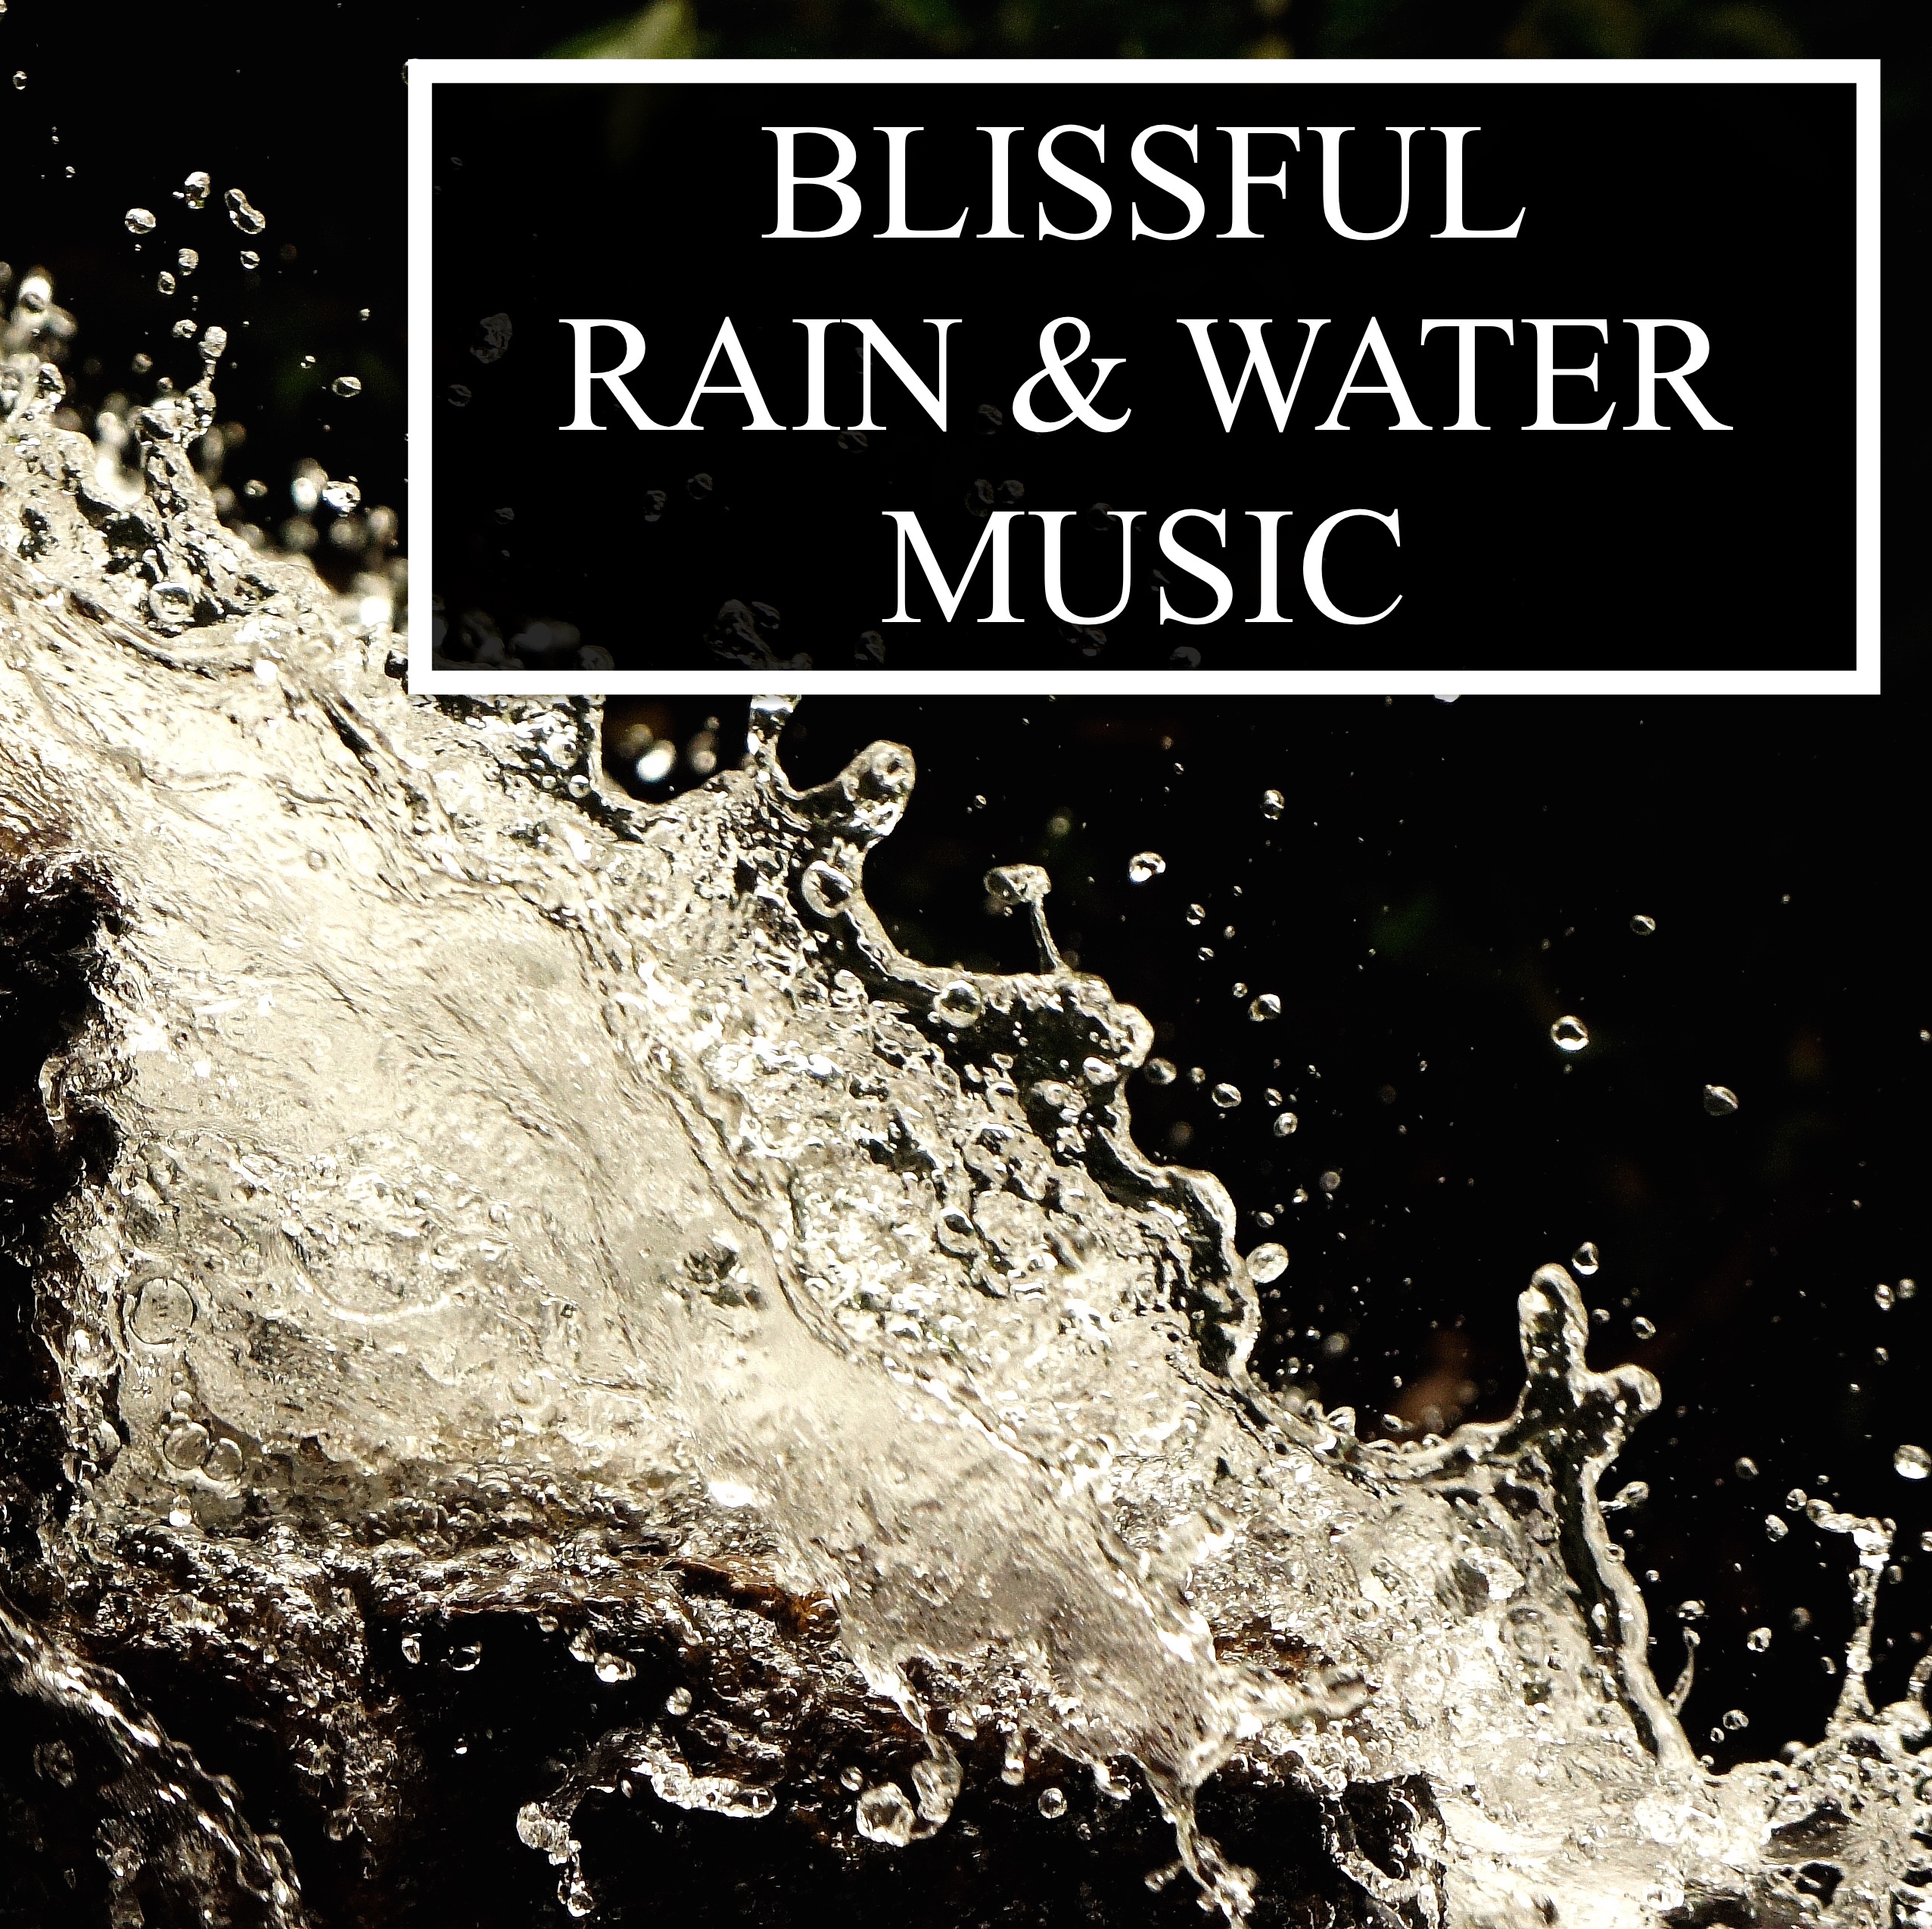 Blissful Rain & Water Music - Timeless Nature Melodies for Total Relaxation, Anxiety Relief, Deep Focus, Meditation and Study Success